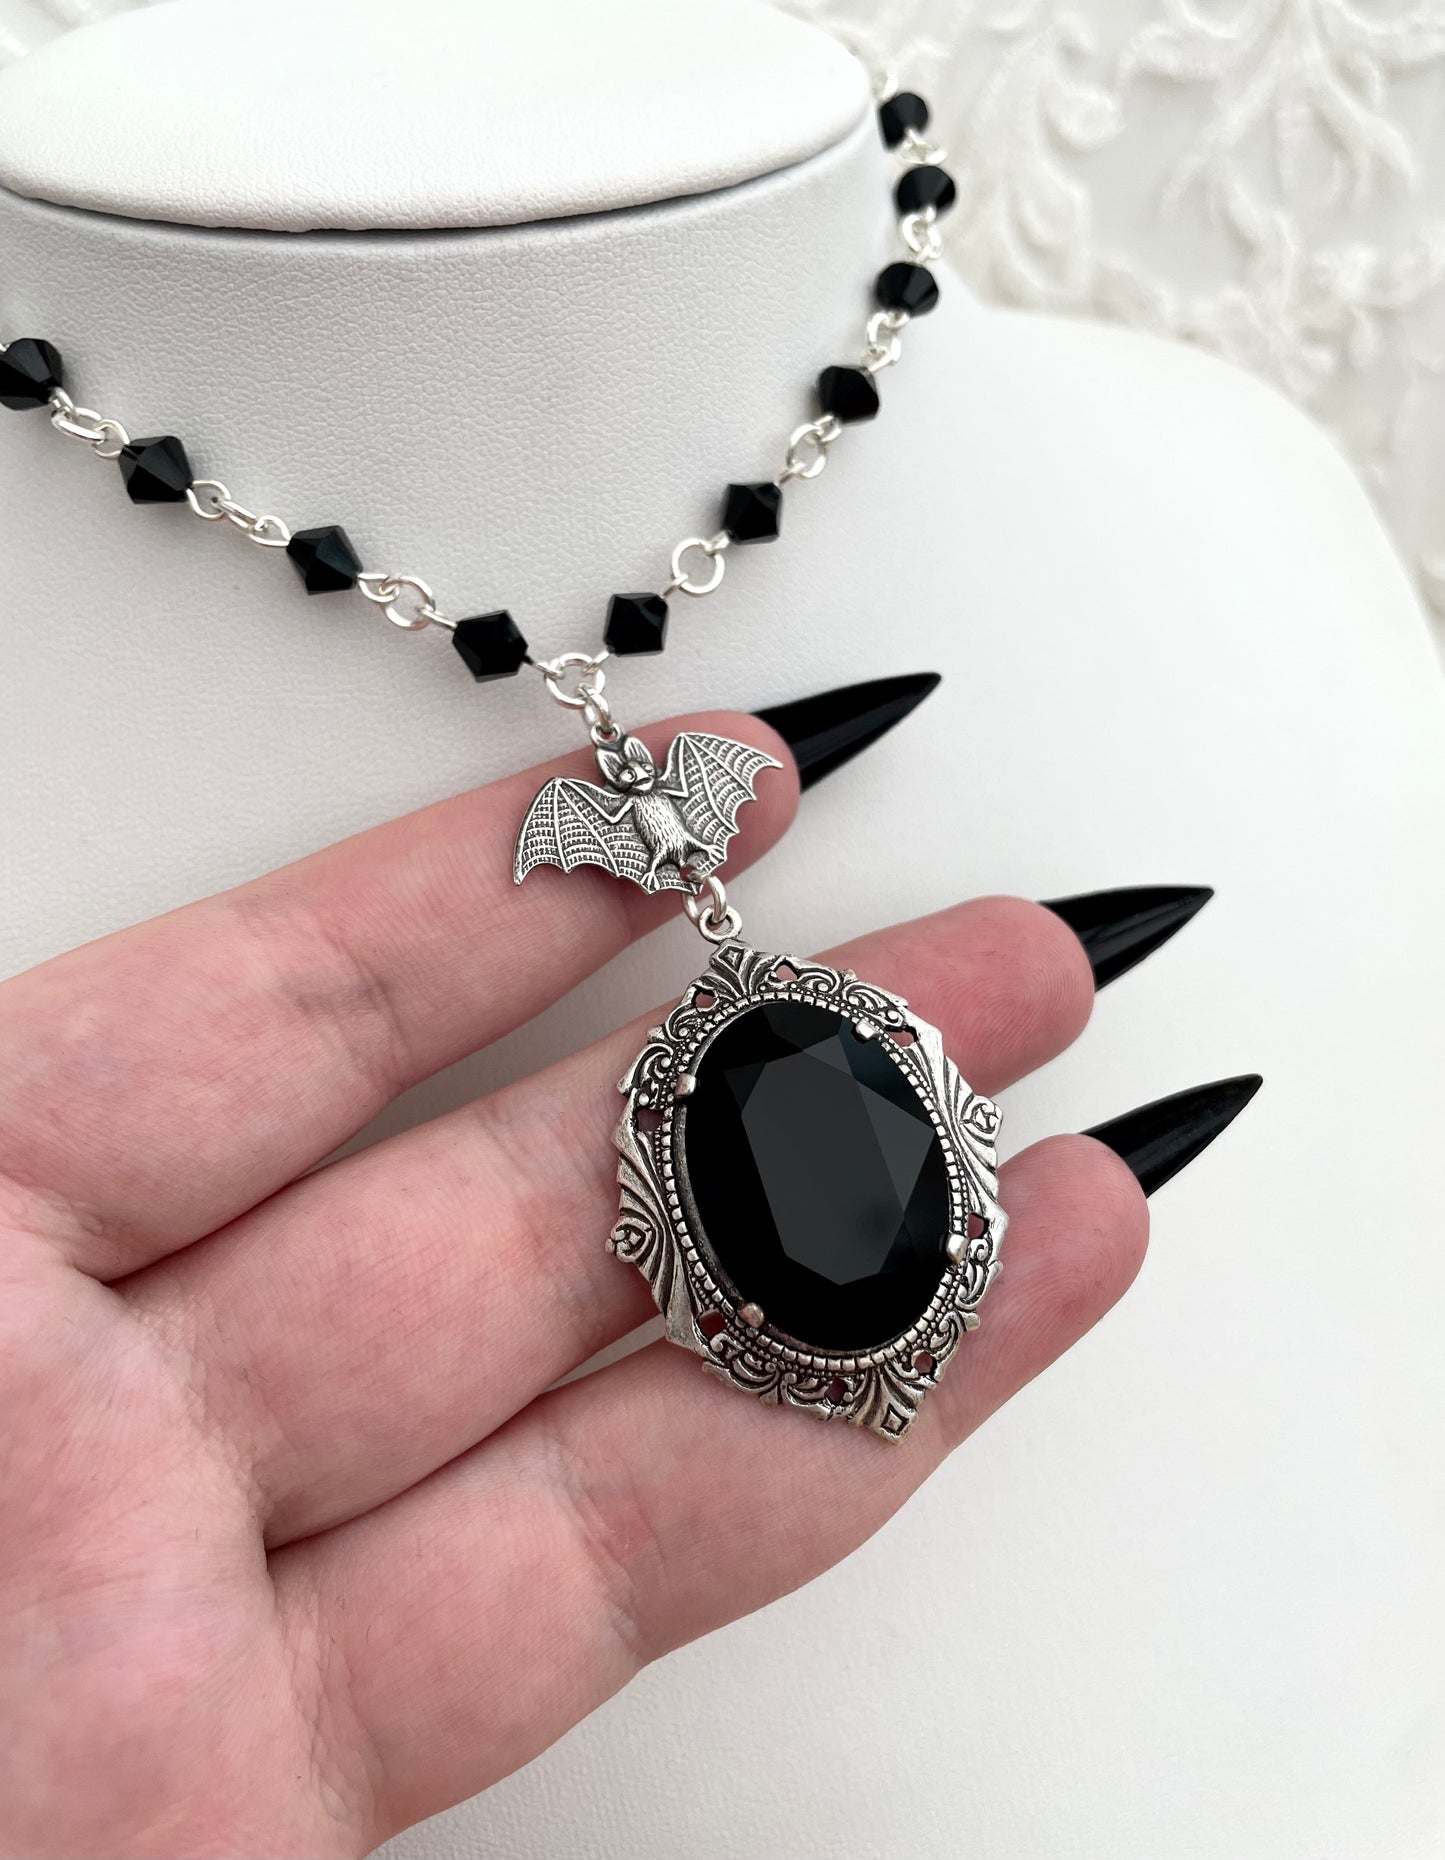 Beaded 'Crypt' Necklace (Death Black)